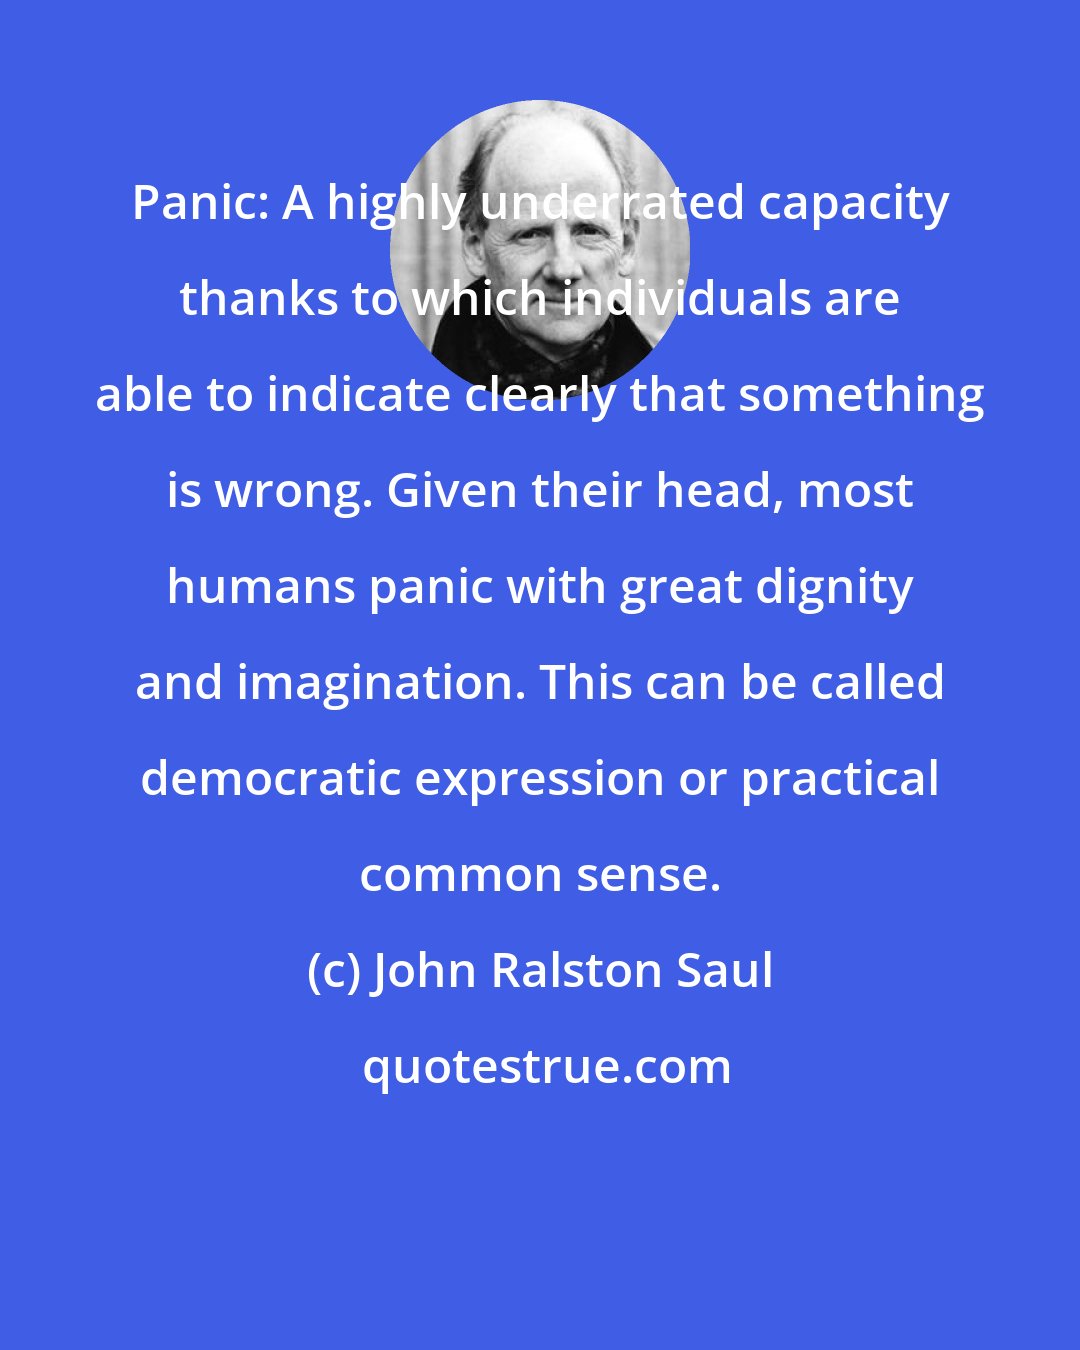 John Ralston Saul: Panic: A highly underrated capacity thanks to which individuals are able to indicate clearly that something is wrong. Given their head, most humans panic with great dignity and imagination. This can be called democratic expression or practical common sense.